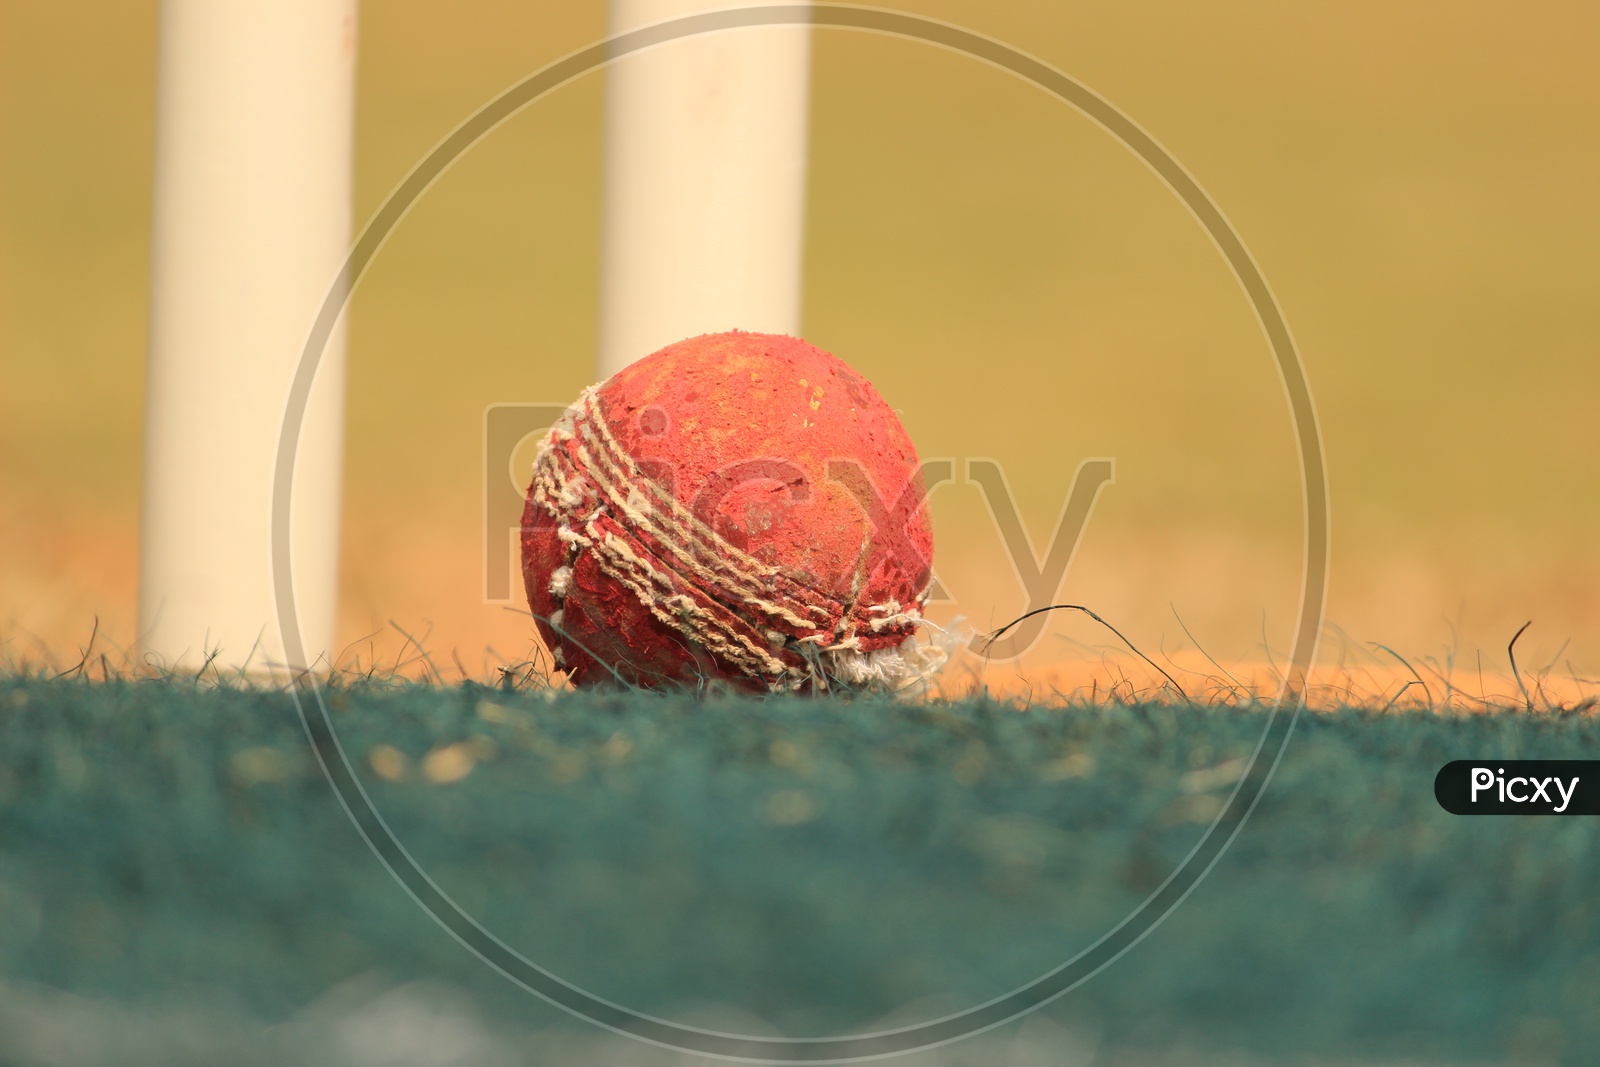 Cricket Ball and Stumps